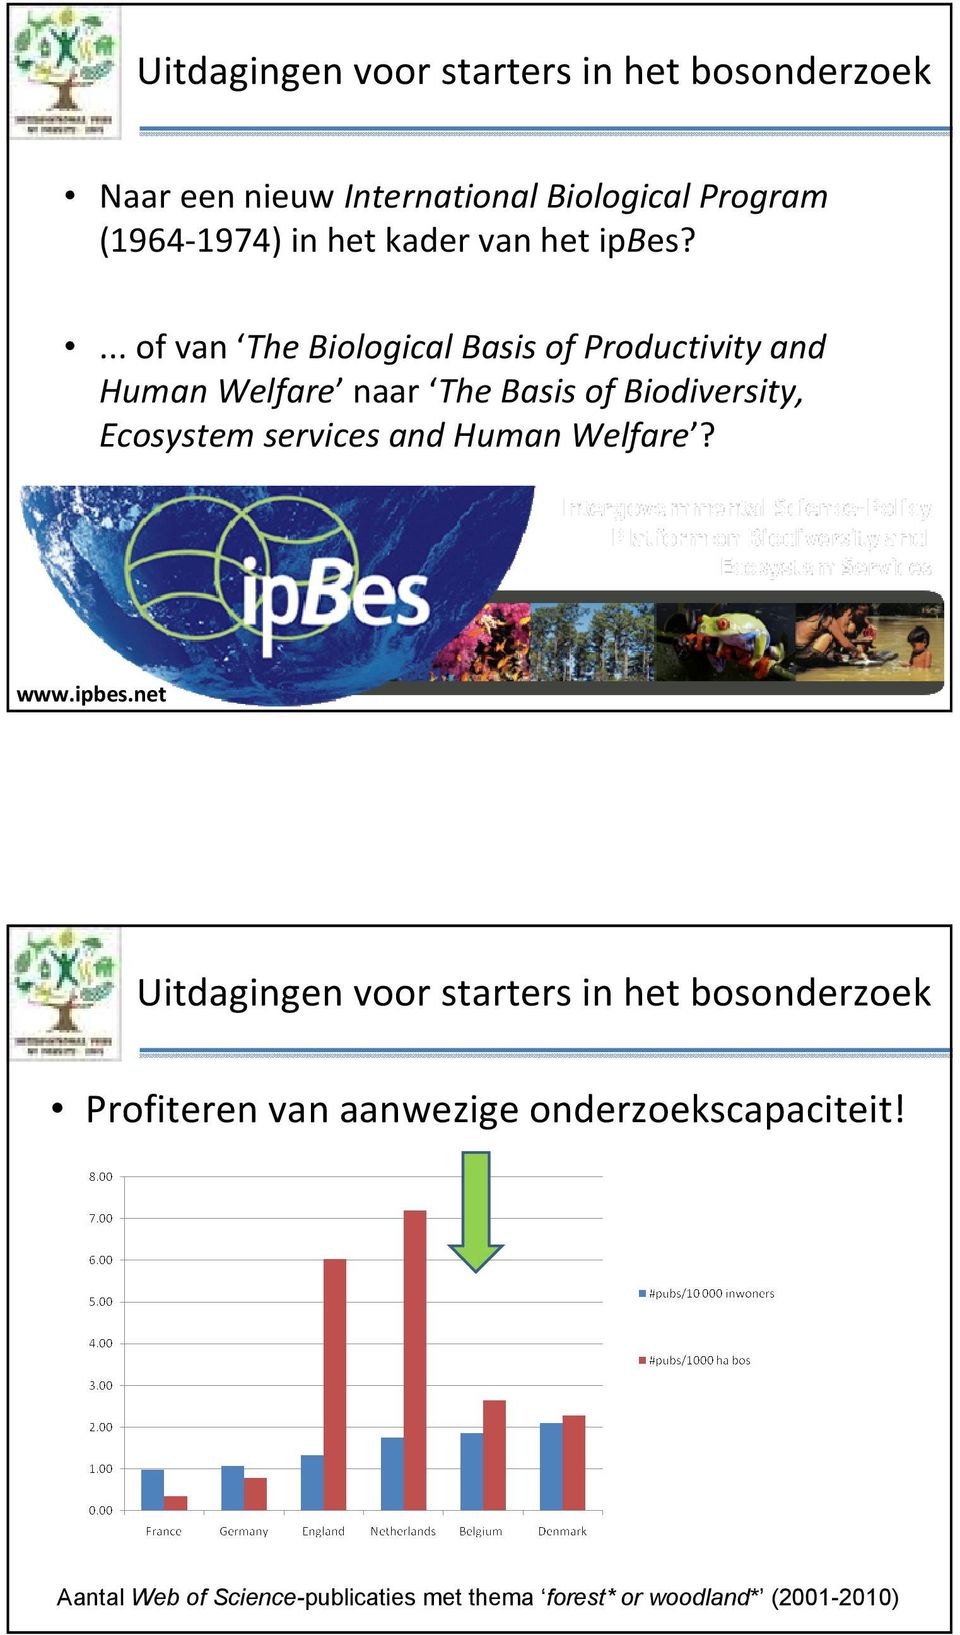 ... of van The Biological Basis of Productivity and Human Welfare naar The Basis of Biodiversity, Ecosystem